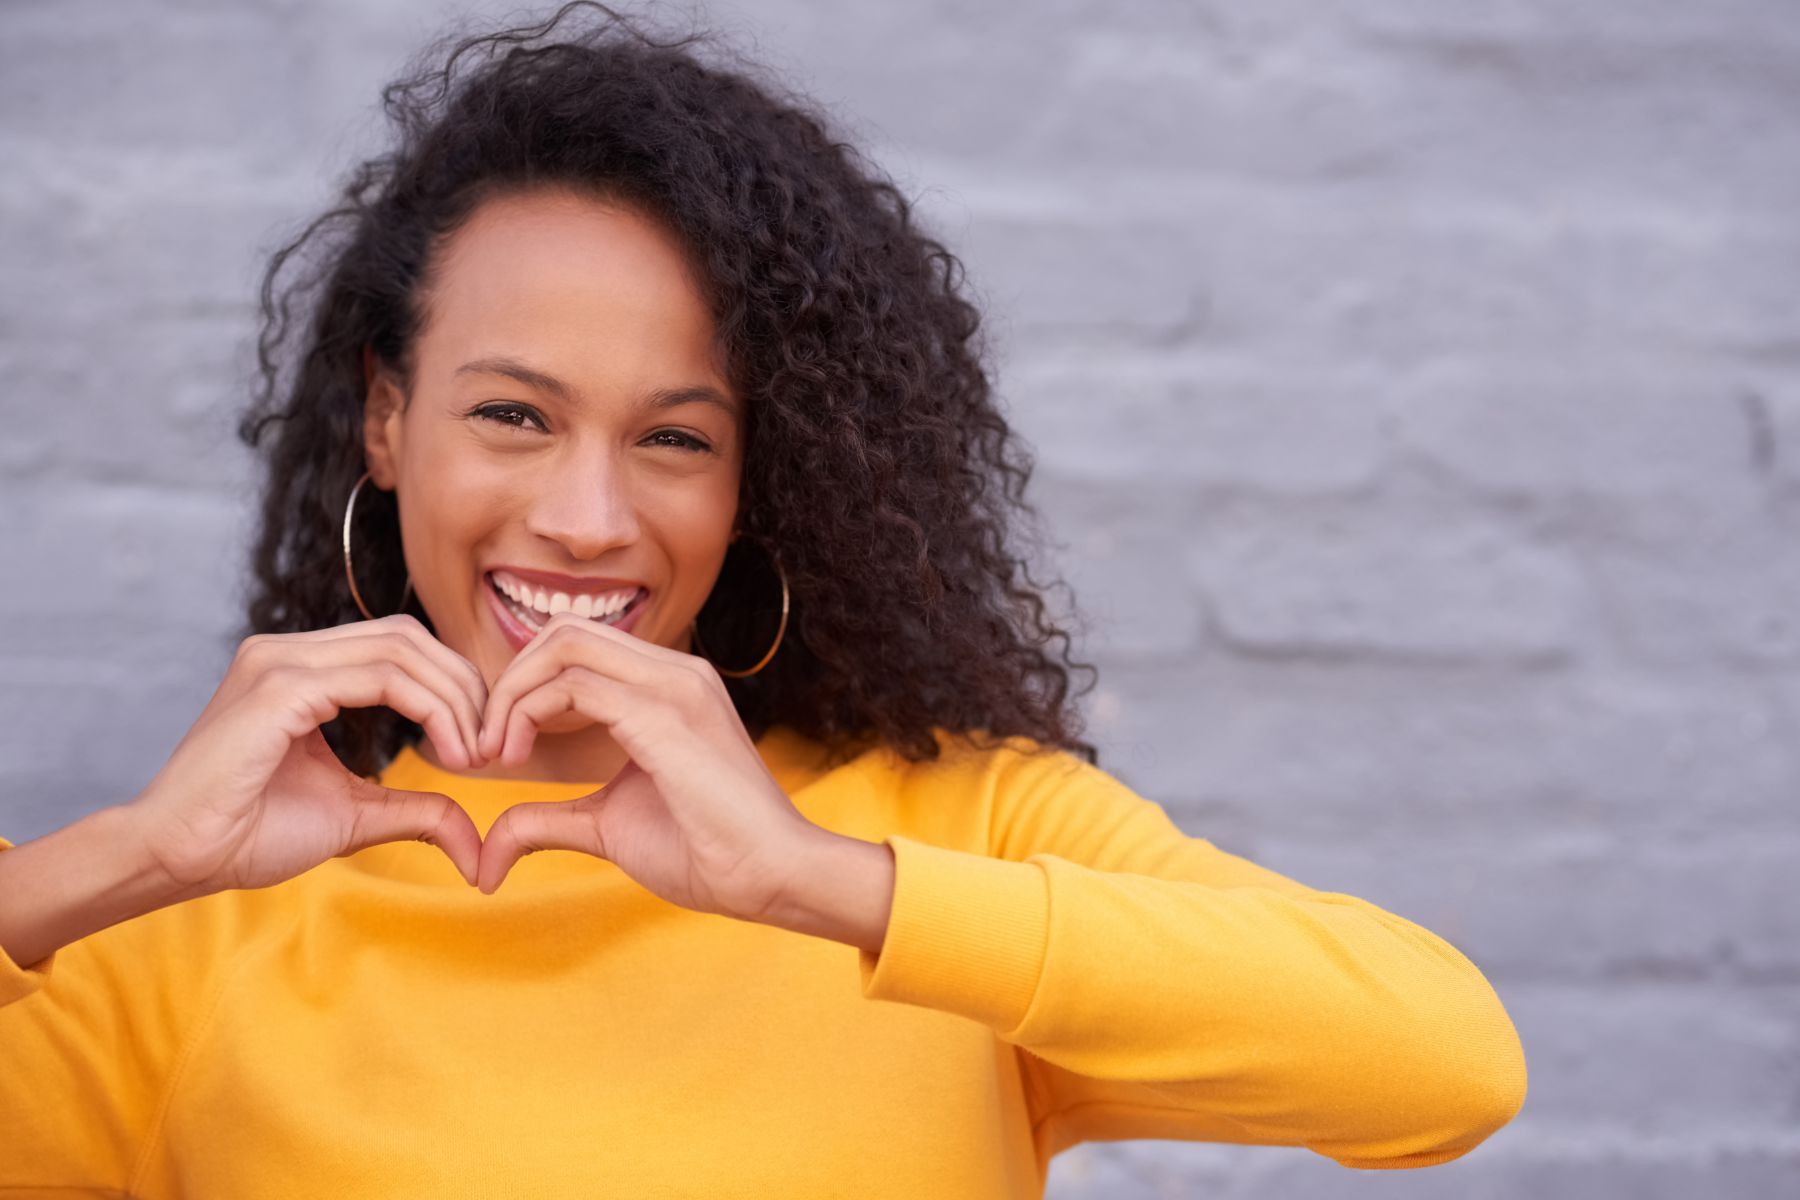 A young black woman with shoulder-length curly hair and a yellow t-shirt holds her hands up in a heart shape